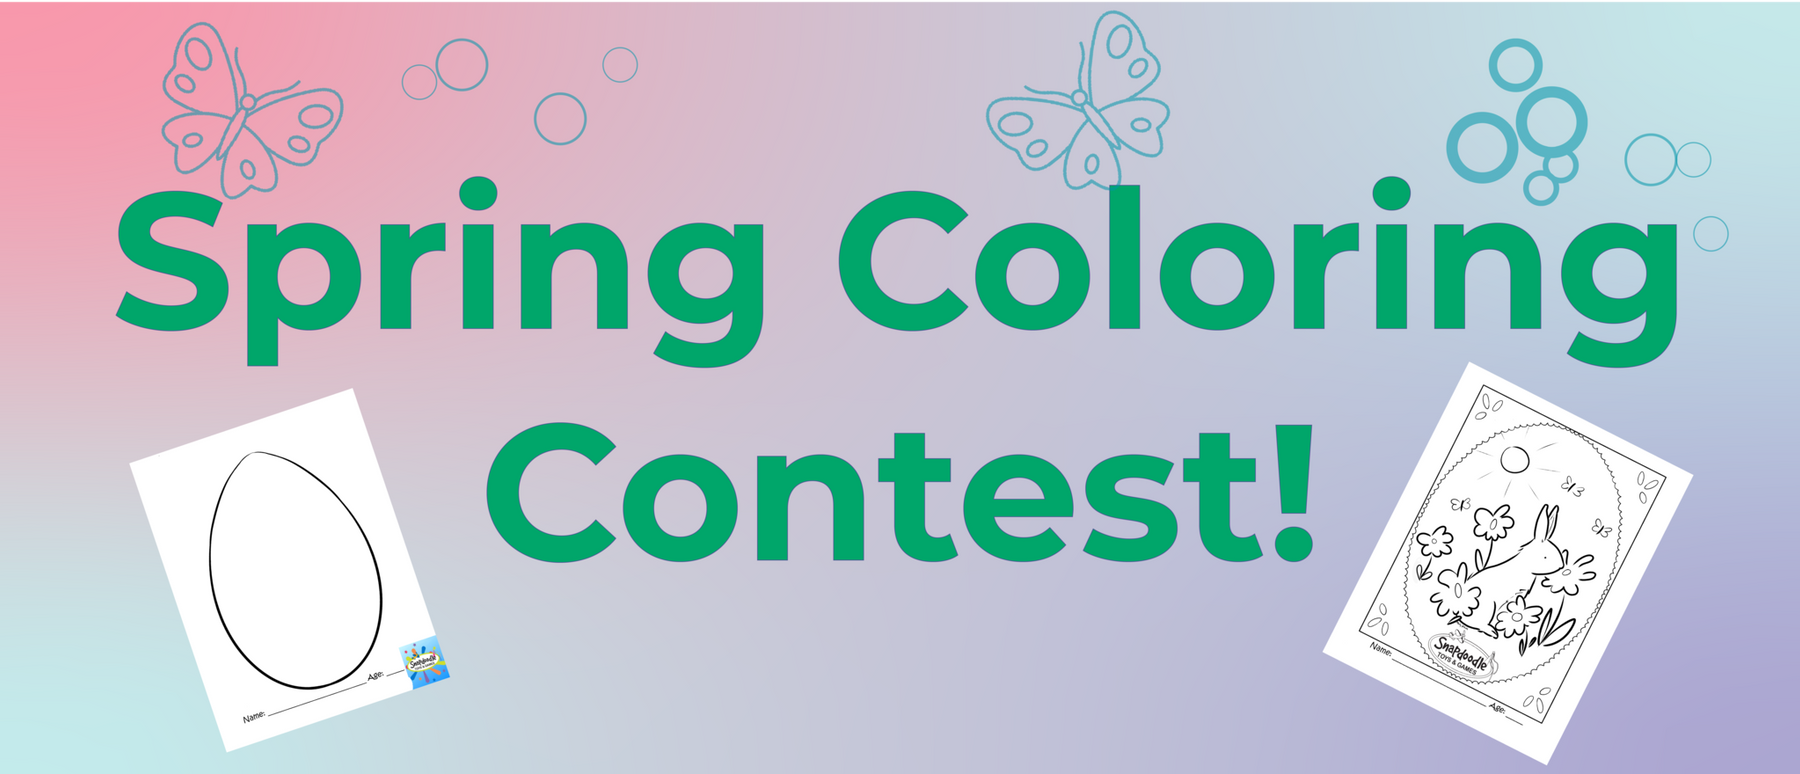 Snapdoodle Spring Coloring Contest!